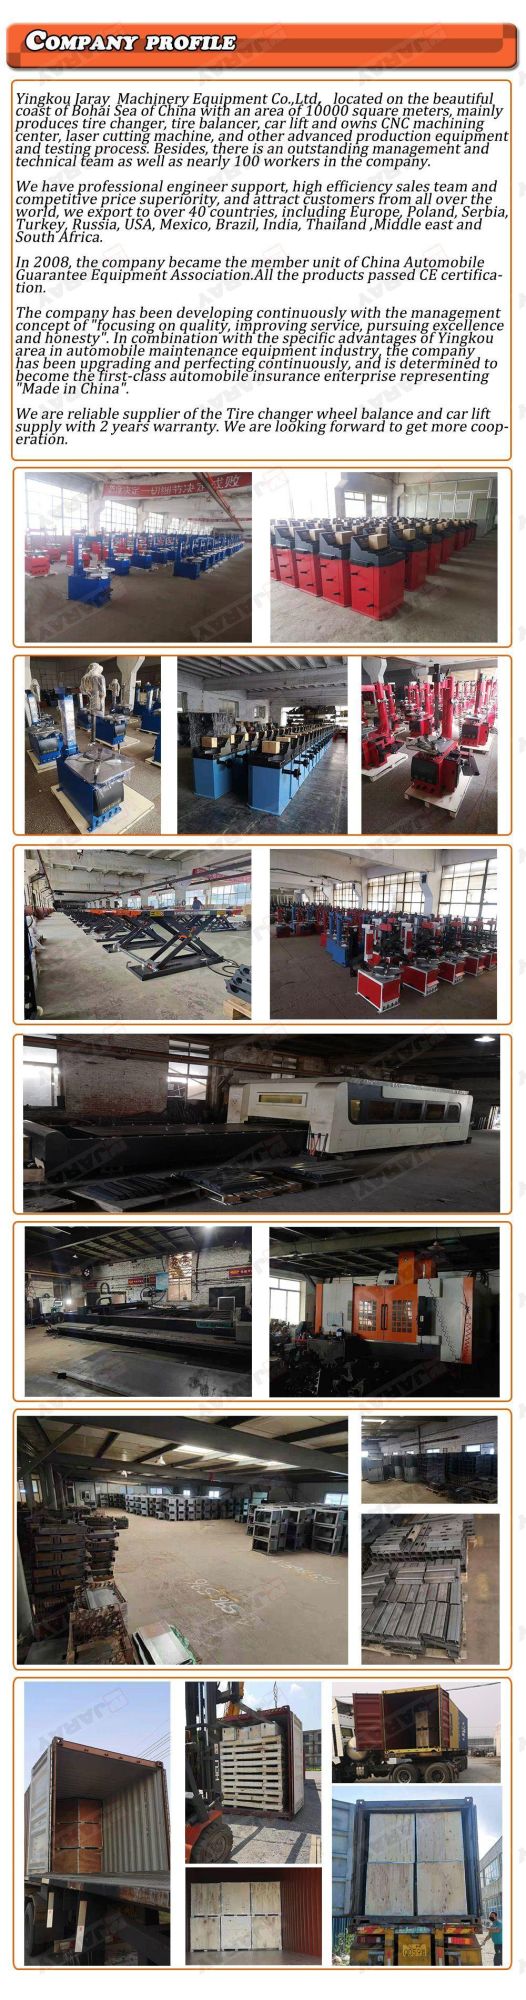 Yingkou Hot Sale Workshop Equipment Easy Operation Air Cylinder Tyre Change for Sale Tyre Tire Changer